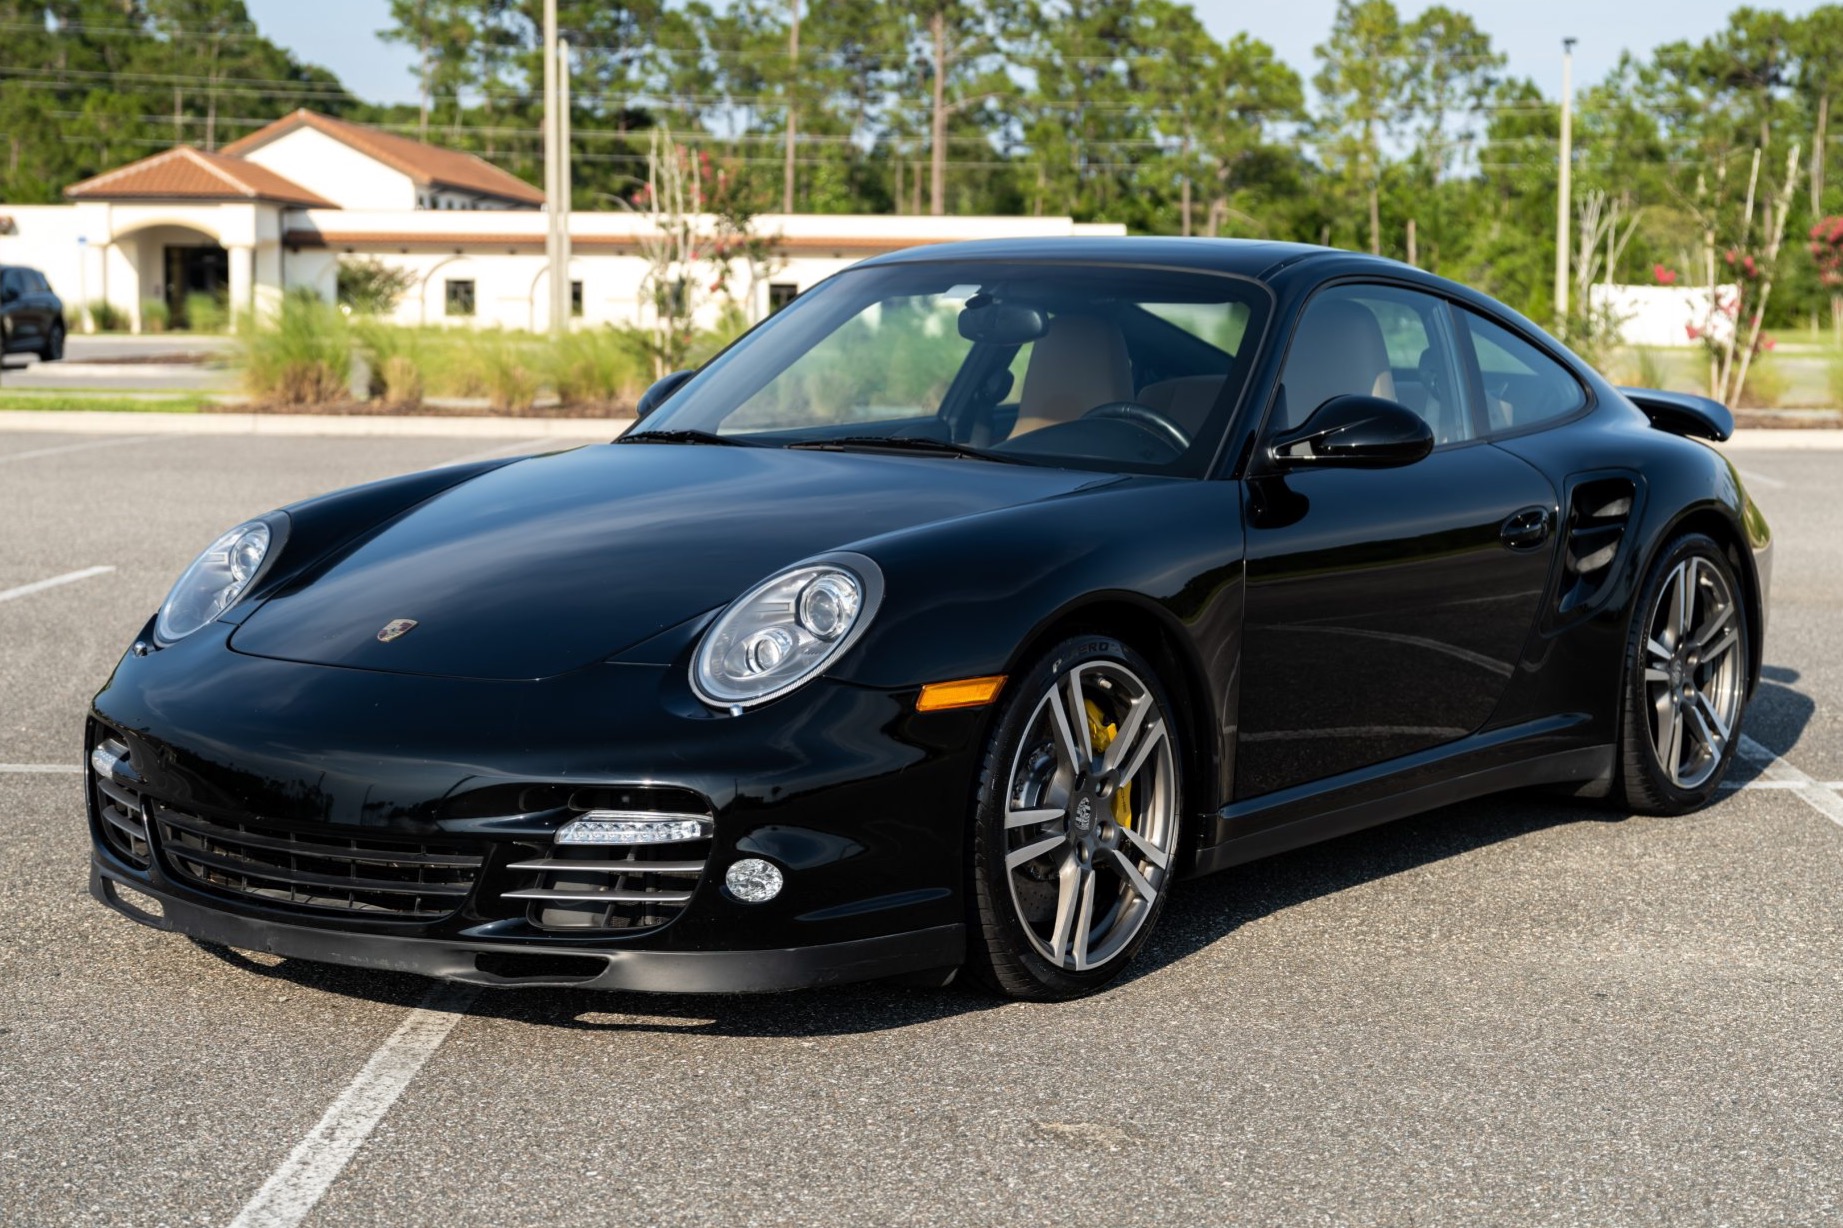 Used 37k-Mile 2011 Porsche 911 Turbo S Coupe Review